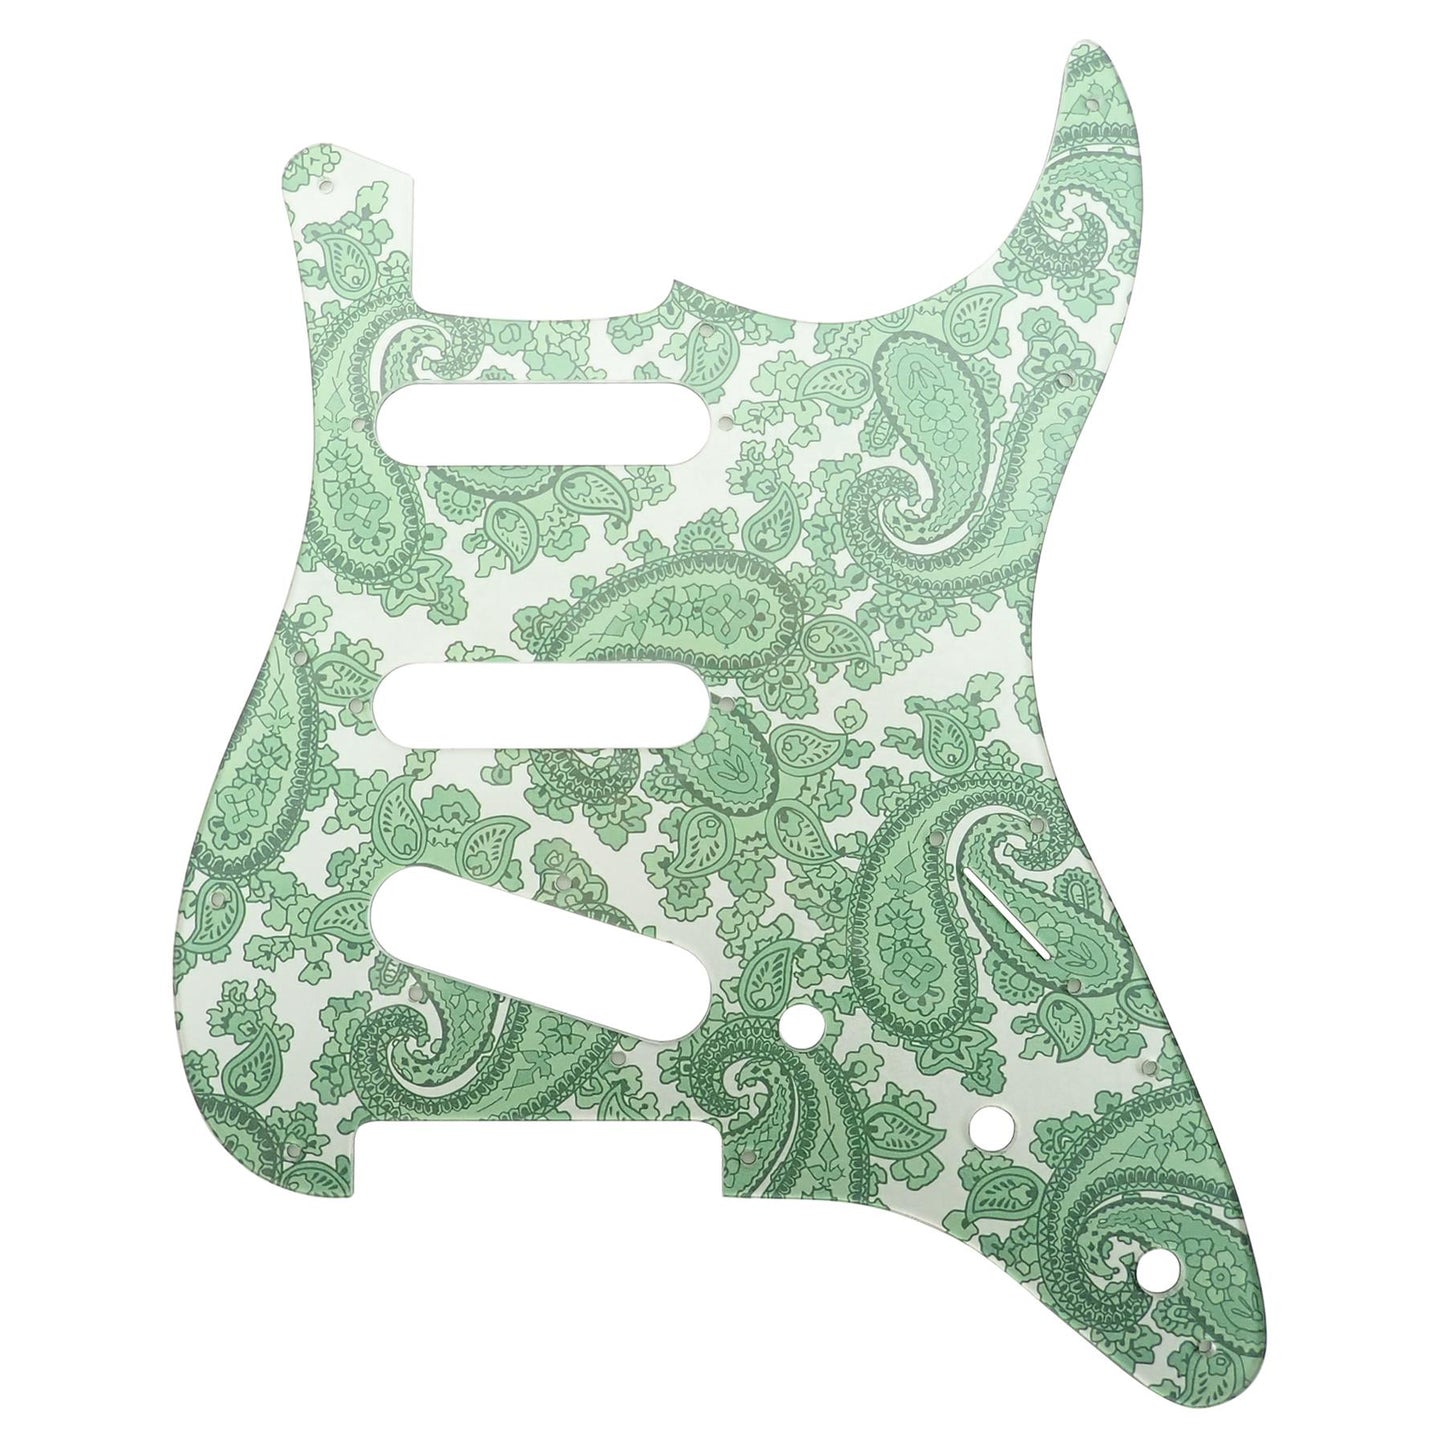 Luthitec Mint Green Backed Racing Green Paisley Acrylic Stratocaster 11 Hole Guitar Pickguard